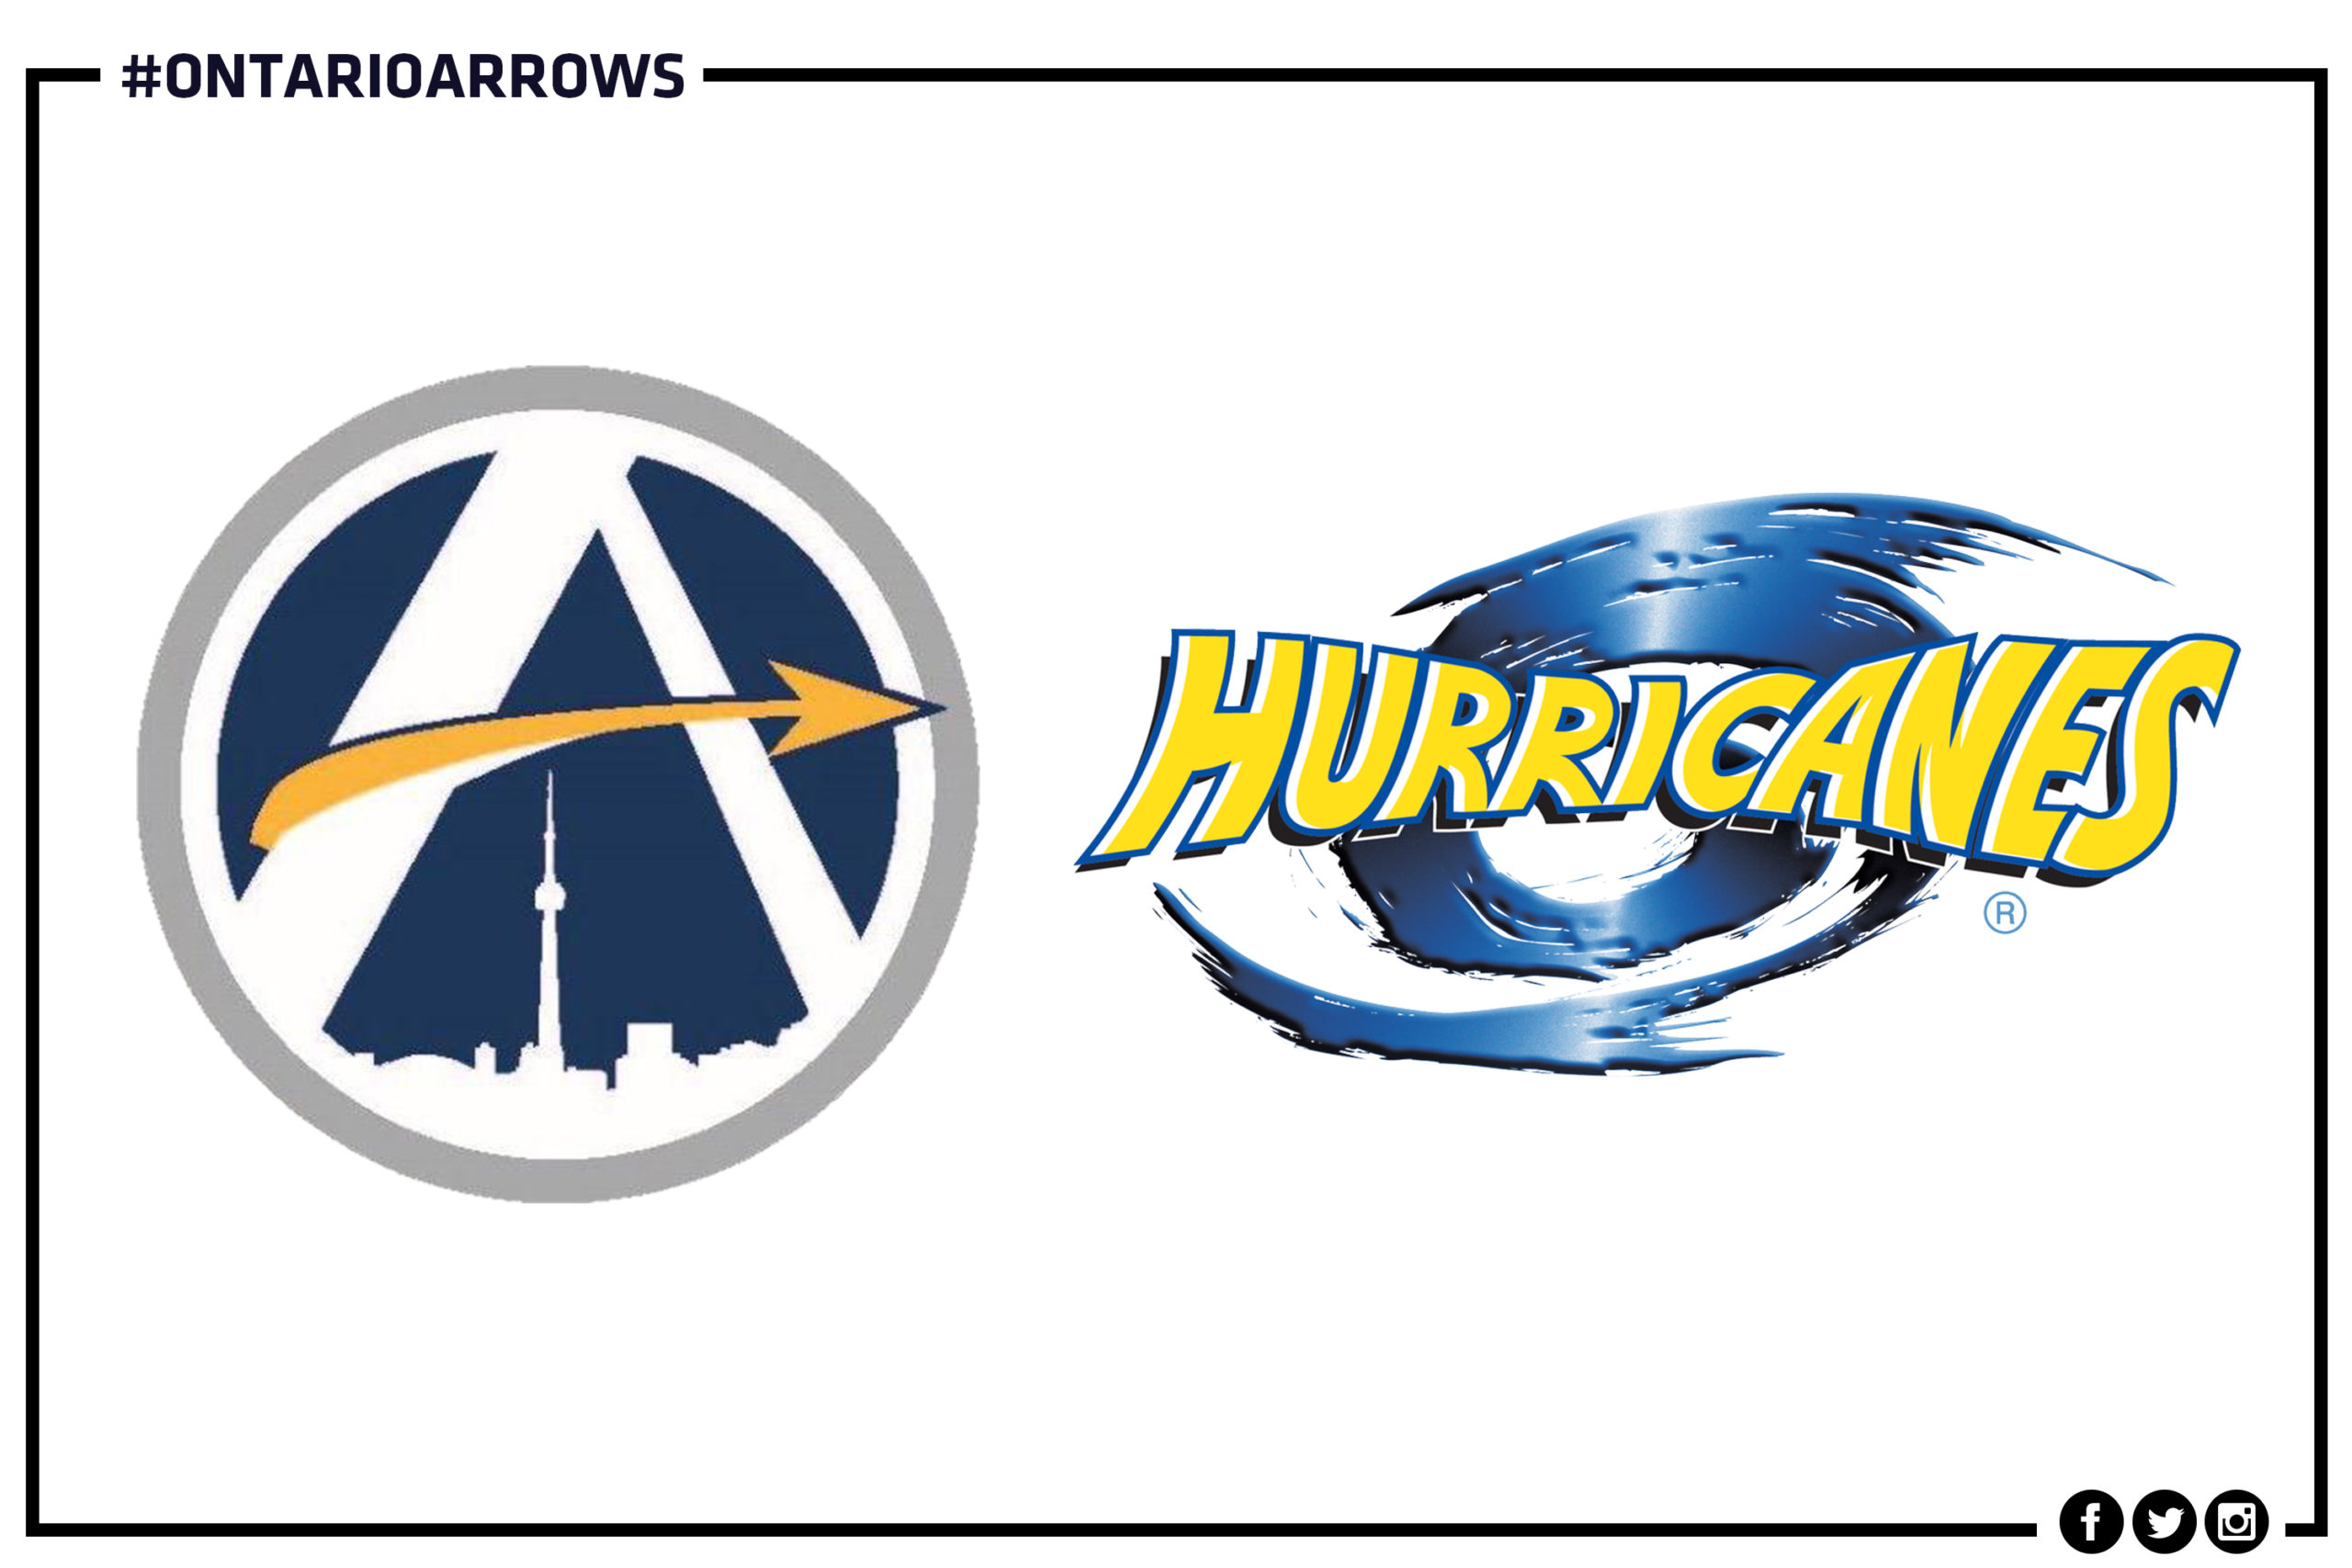 Ontario Arrows Form Partnership with Super Rugby Club Side Hurricanes